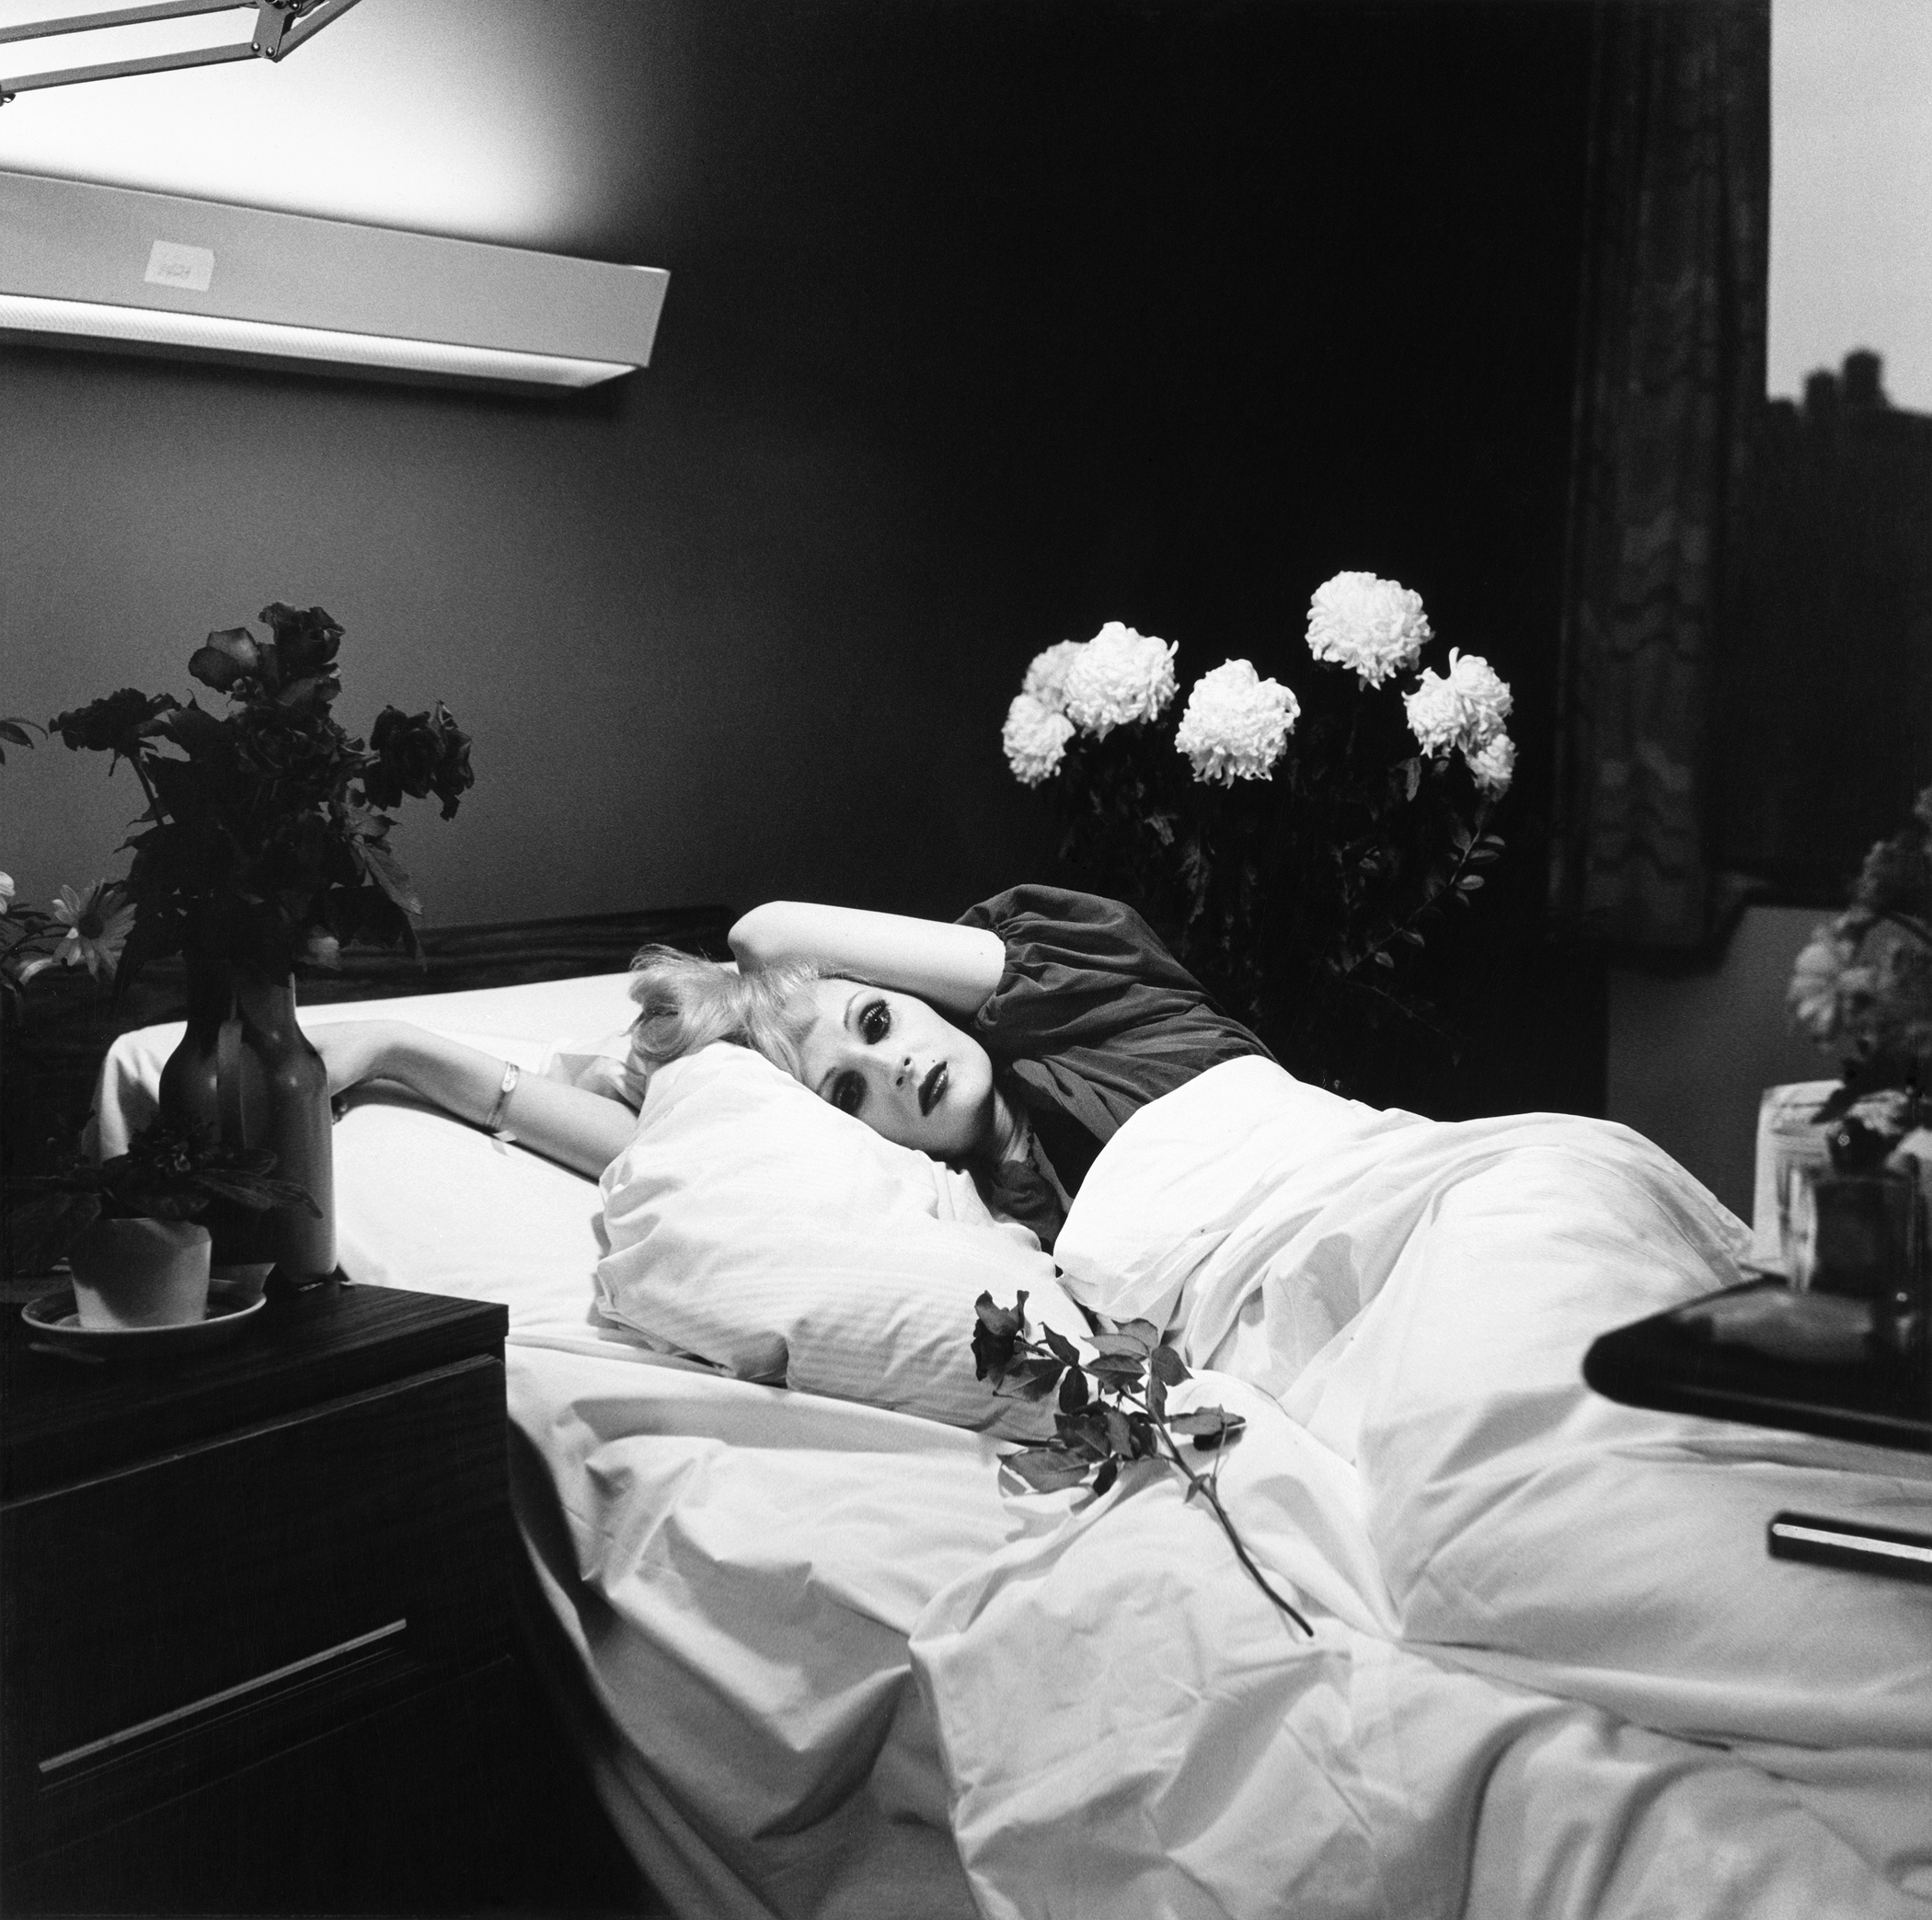 Candy Darling on her Deathbed, 1973